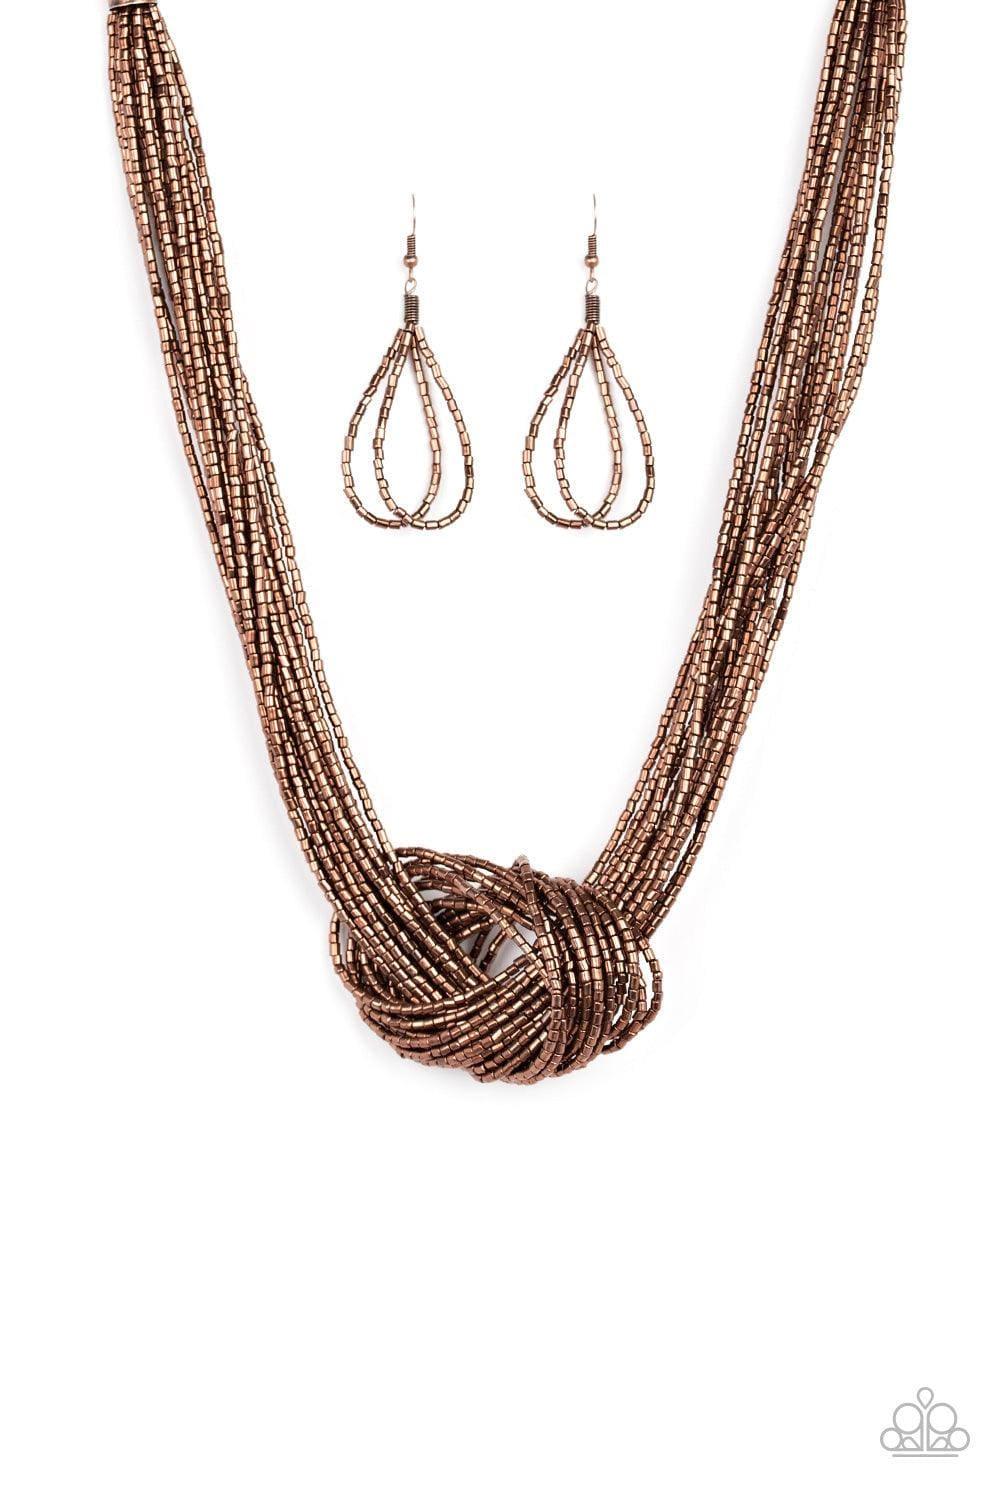 Paparazzi Accessories - Knotted Knockout - Copper Necklace - Bling by JessieK